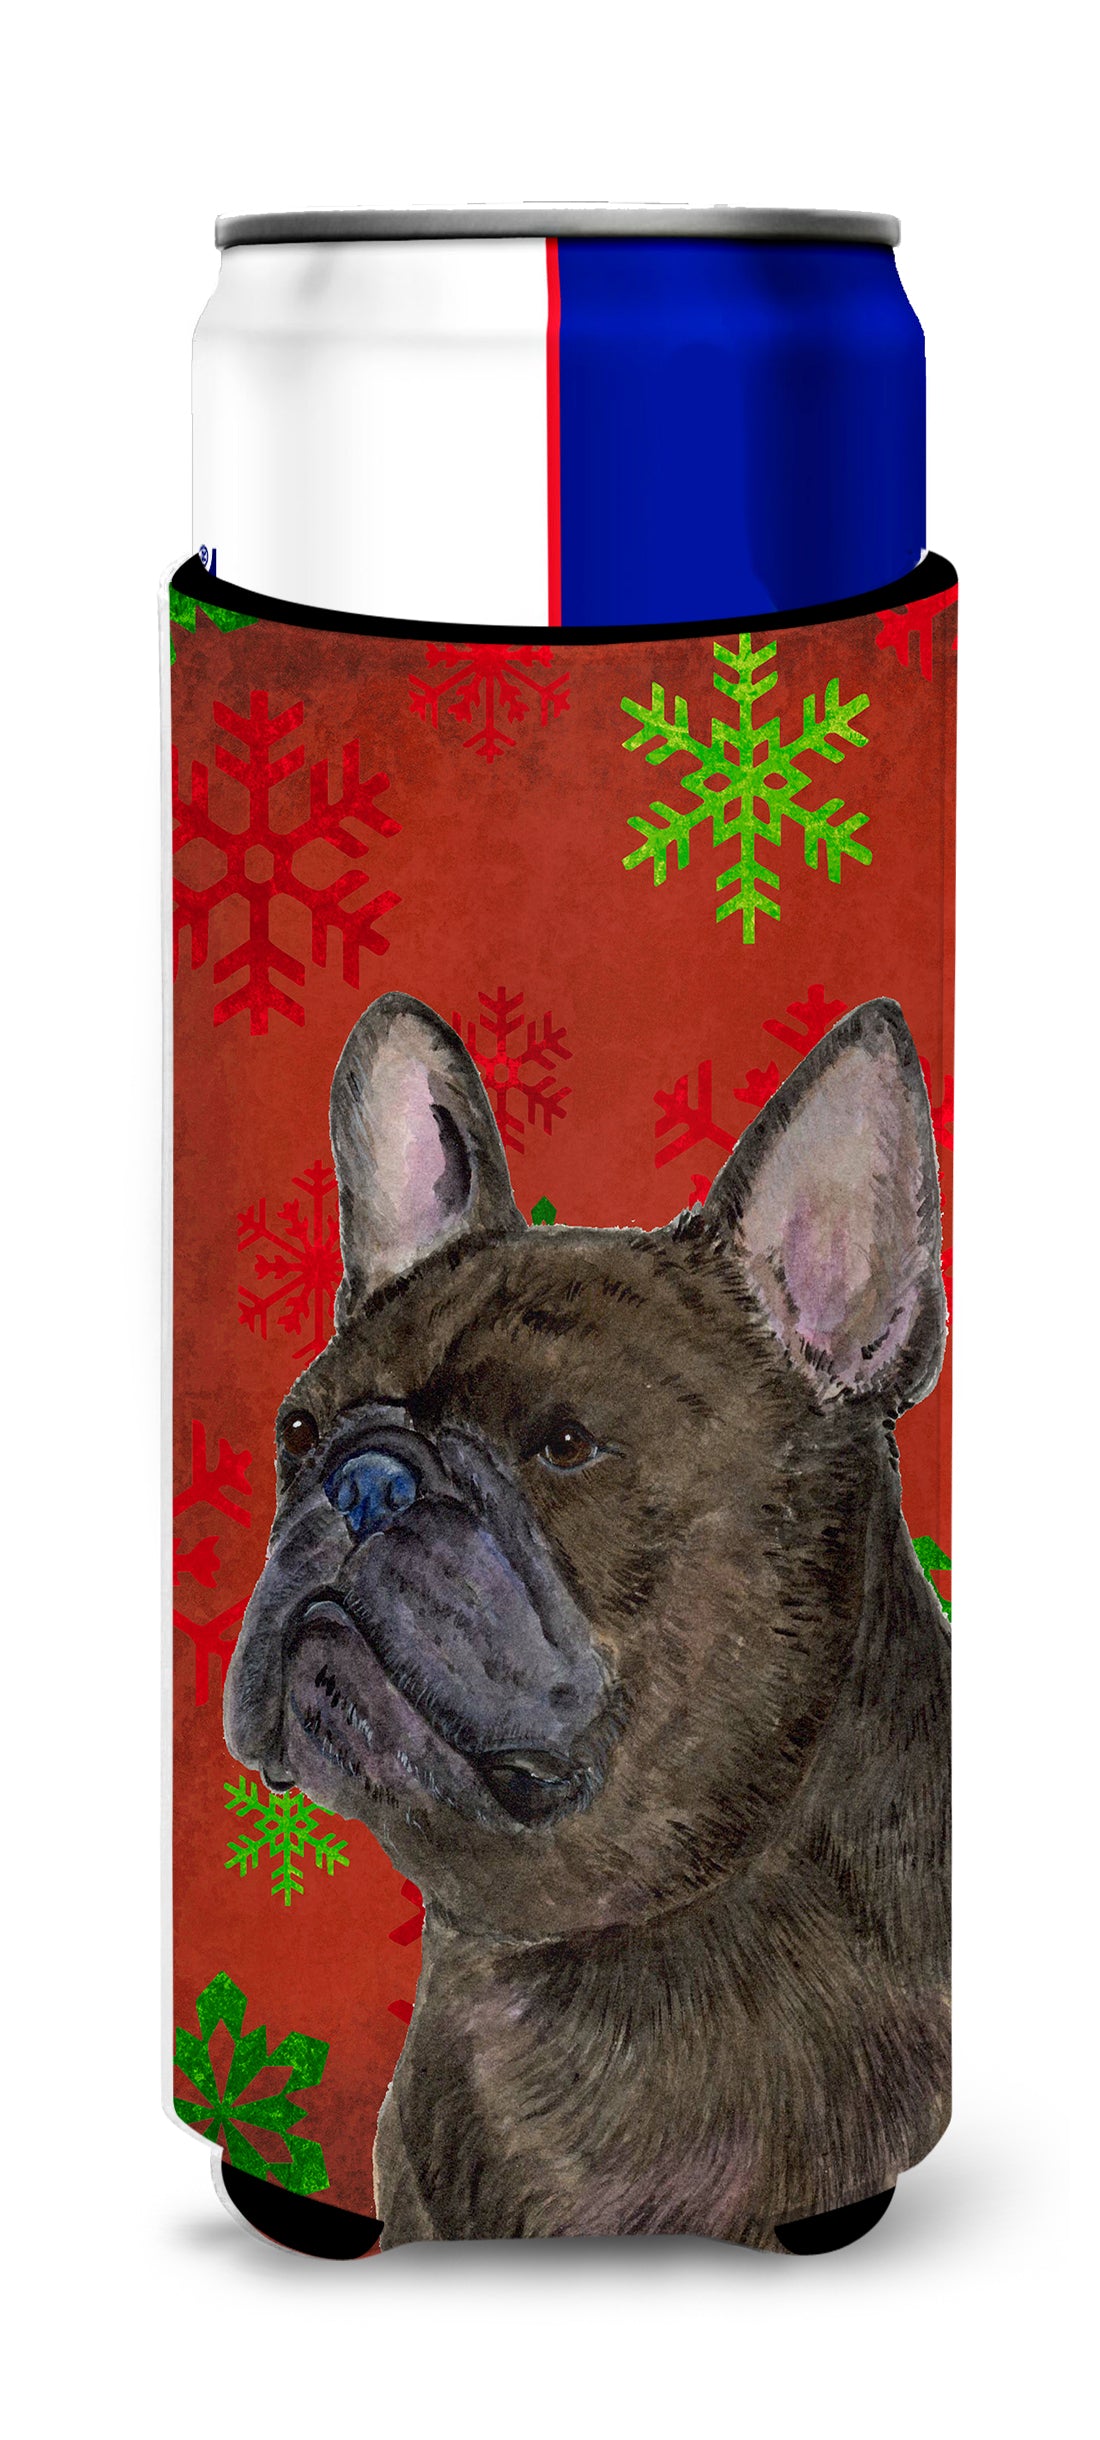 French Bulldog Red and Green Snowflakes Holiday Christmas Ultra Beverage Insulators for slim cans SS4726MUK.